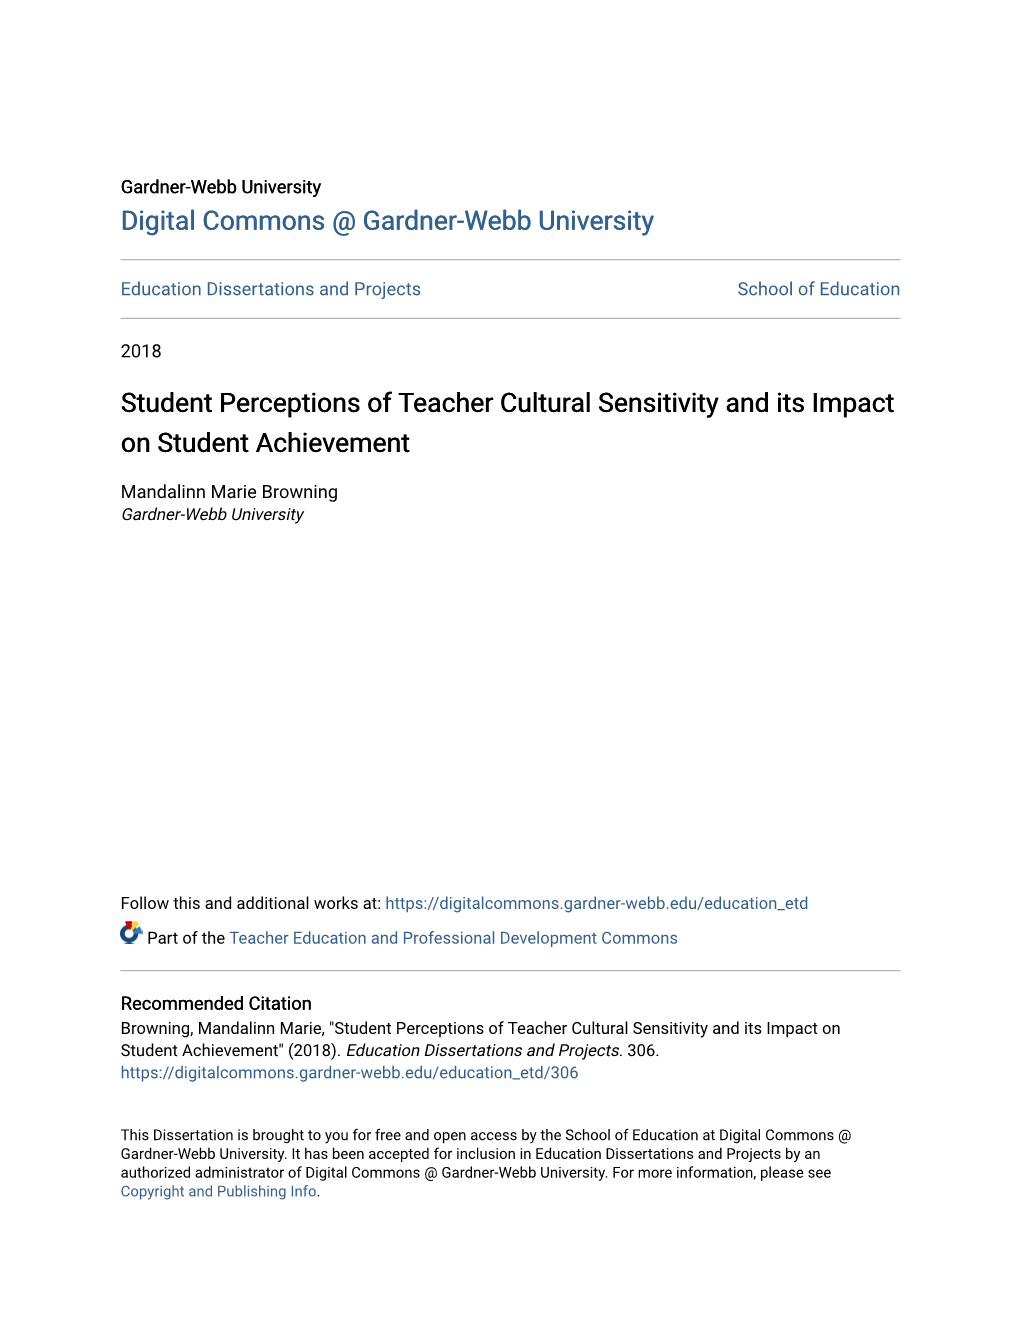 Student Perceptions of Teacher Cultural Sensitivity and Its Impact on Student Achievement